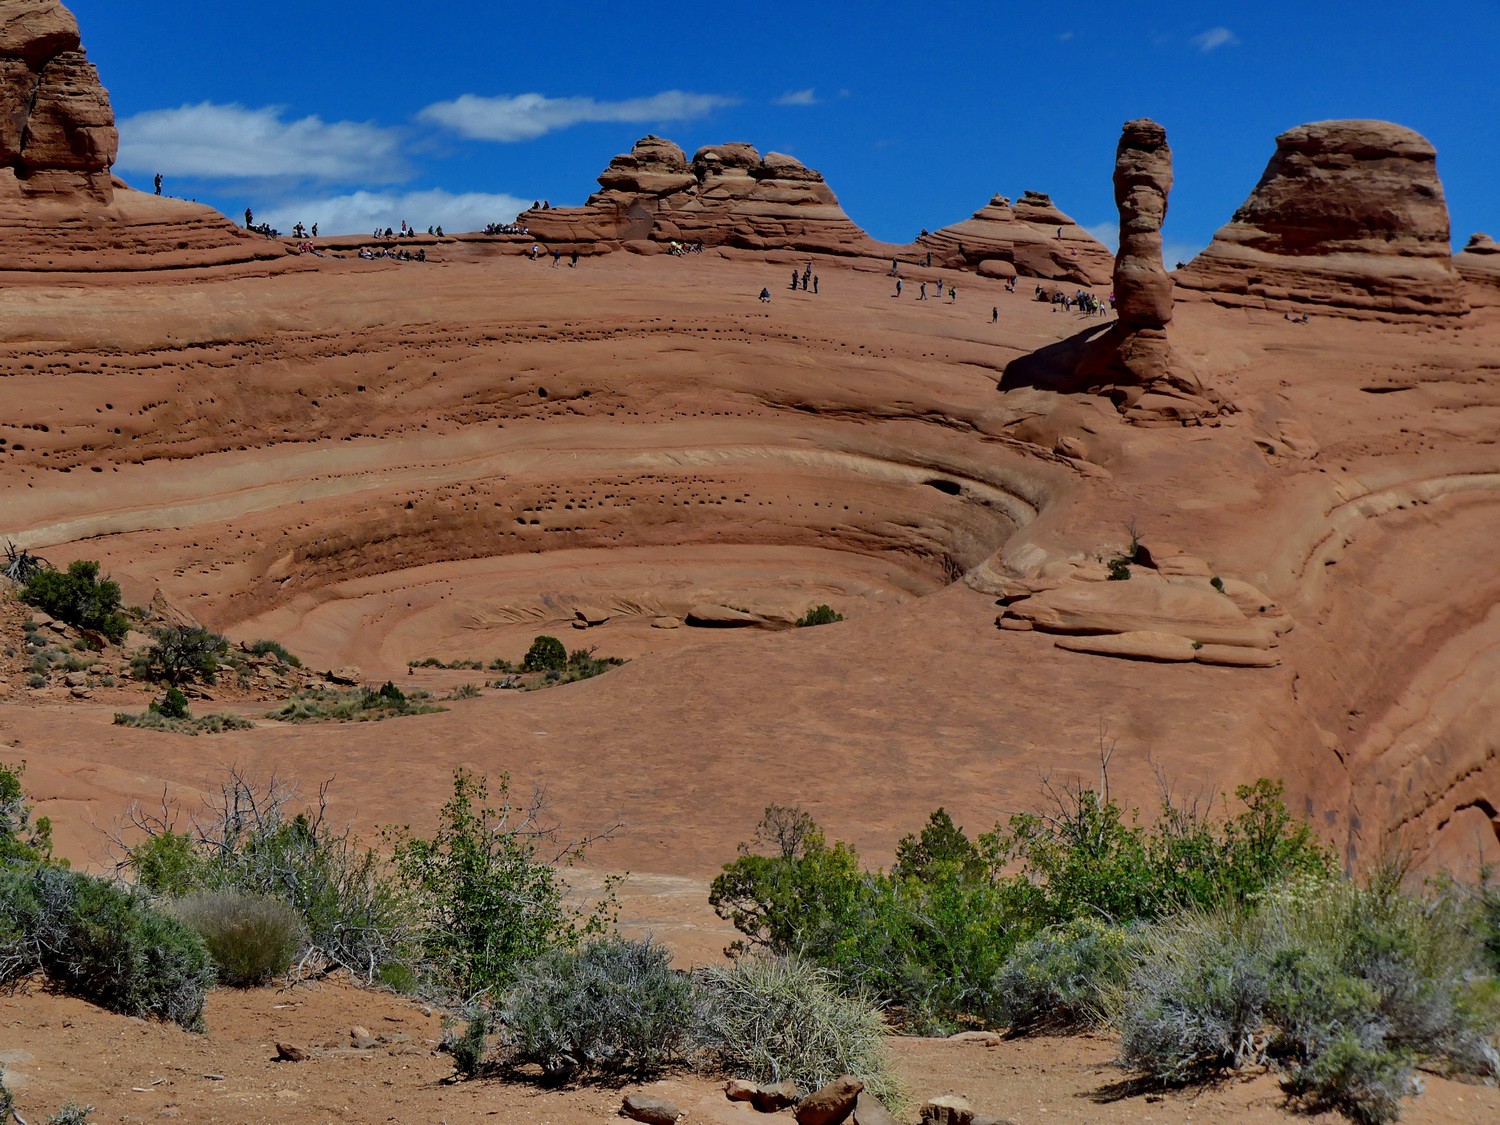 The bowl with Delicate Arch from the side (top right with shadow)